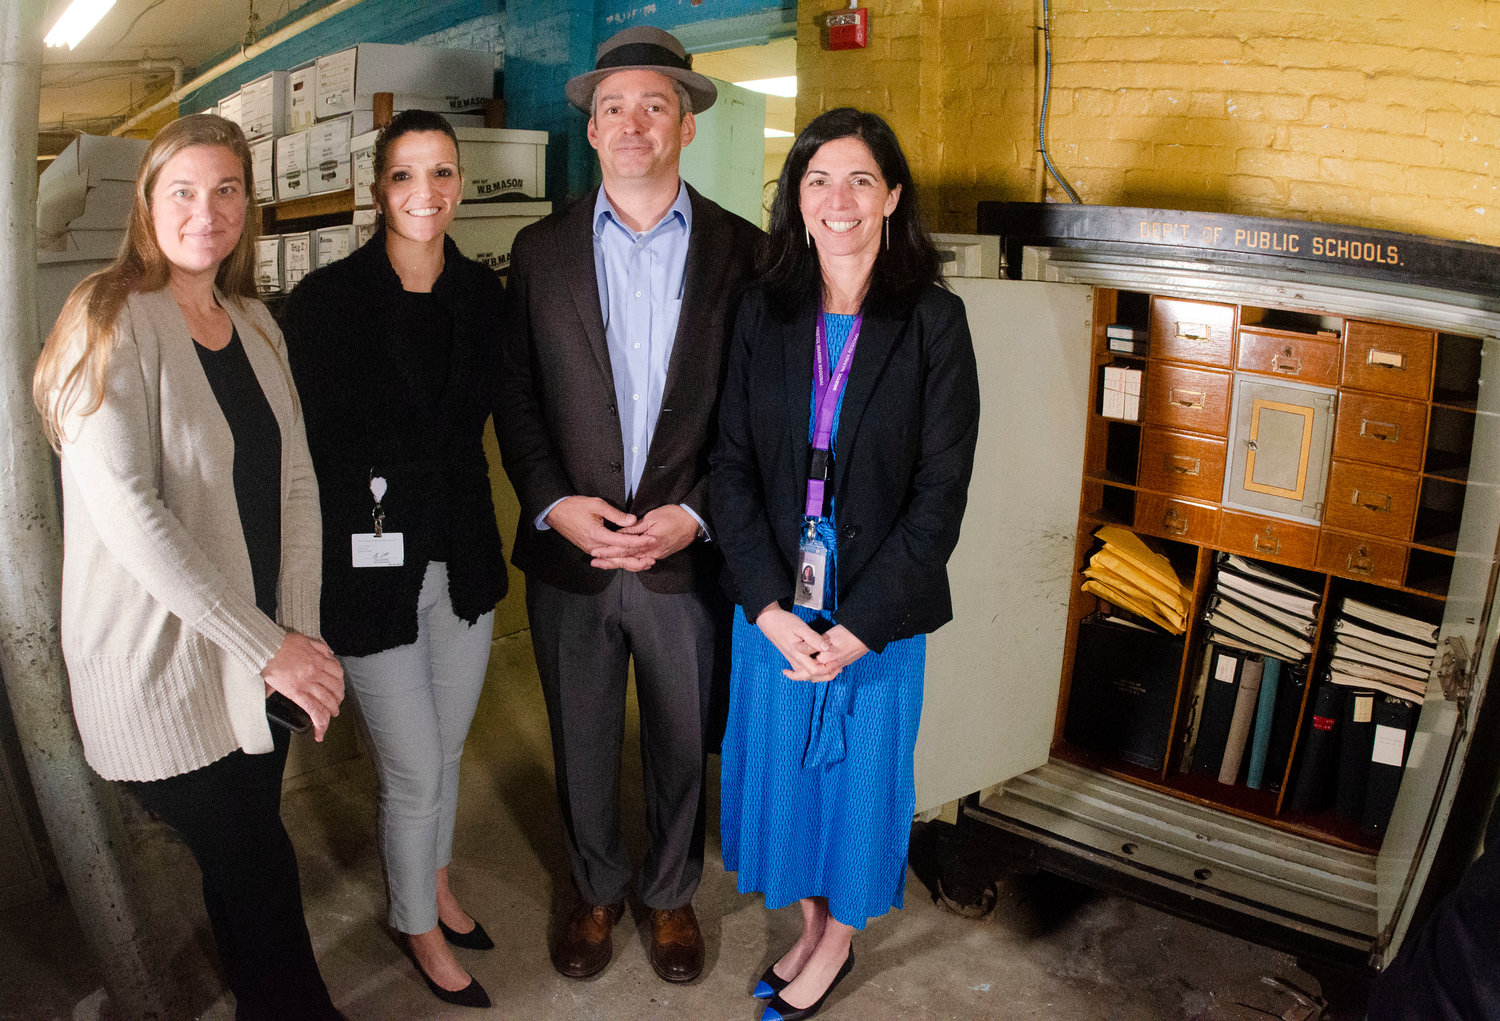 Bristol town treasurer Julie Goucher, town clerk Melissa Cordeiro, town administrator Steve Contente and superintendent Ana Riley pose for a photo after cracking open a safe in the basement of the old Oliver School.